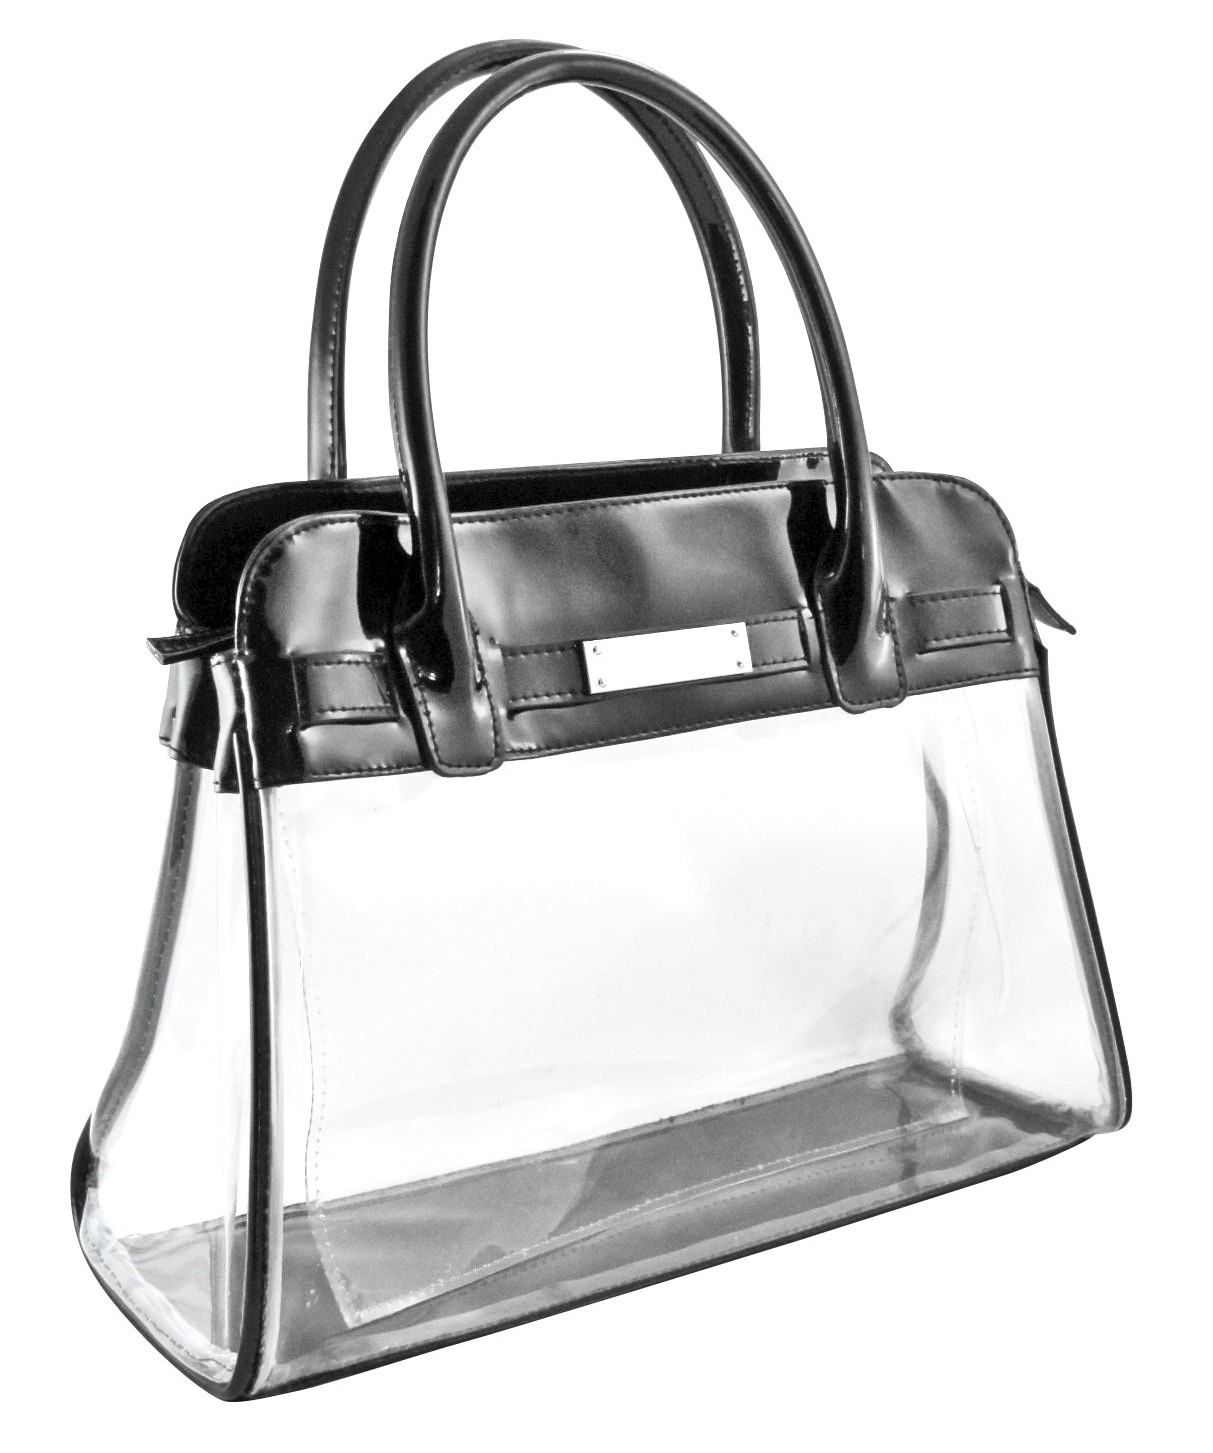 ... of many clear handbags offered on the Clear Handbags  More web site